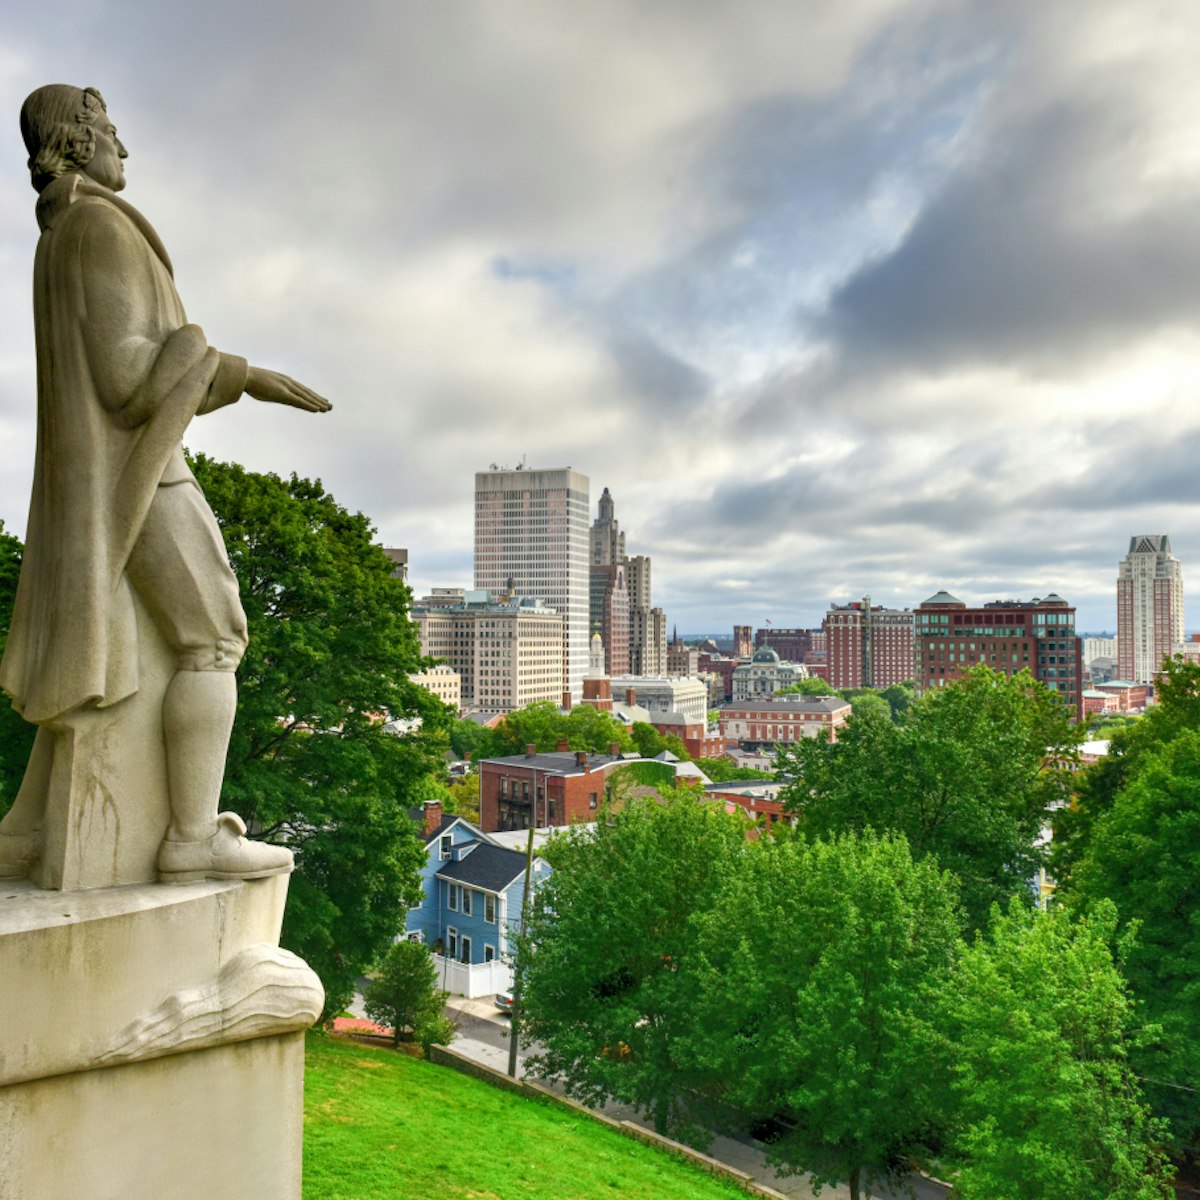 Prospect Terrace Park view of the Providence skyline and Roger Williams statue, Providence, Rhode Island, USA; Shutterstock ID 477150298; Your name (First / Last): Lauren Keith; GL account no.: 65050; Netsuite department name: Content Asset; Full Product or Project name including edition: Guides Project Eastern USA